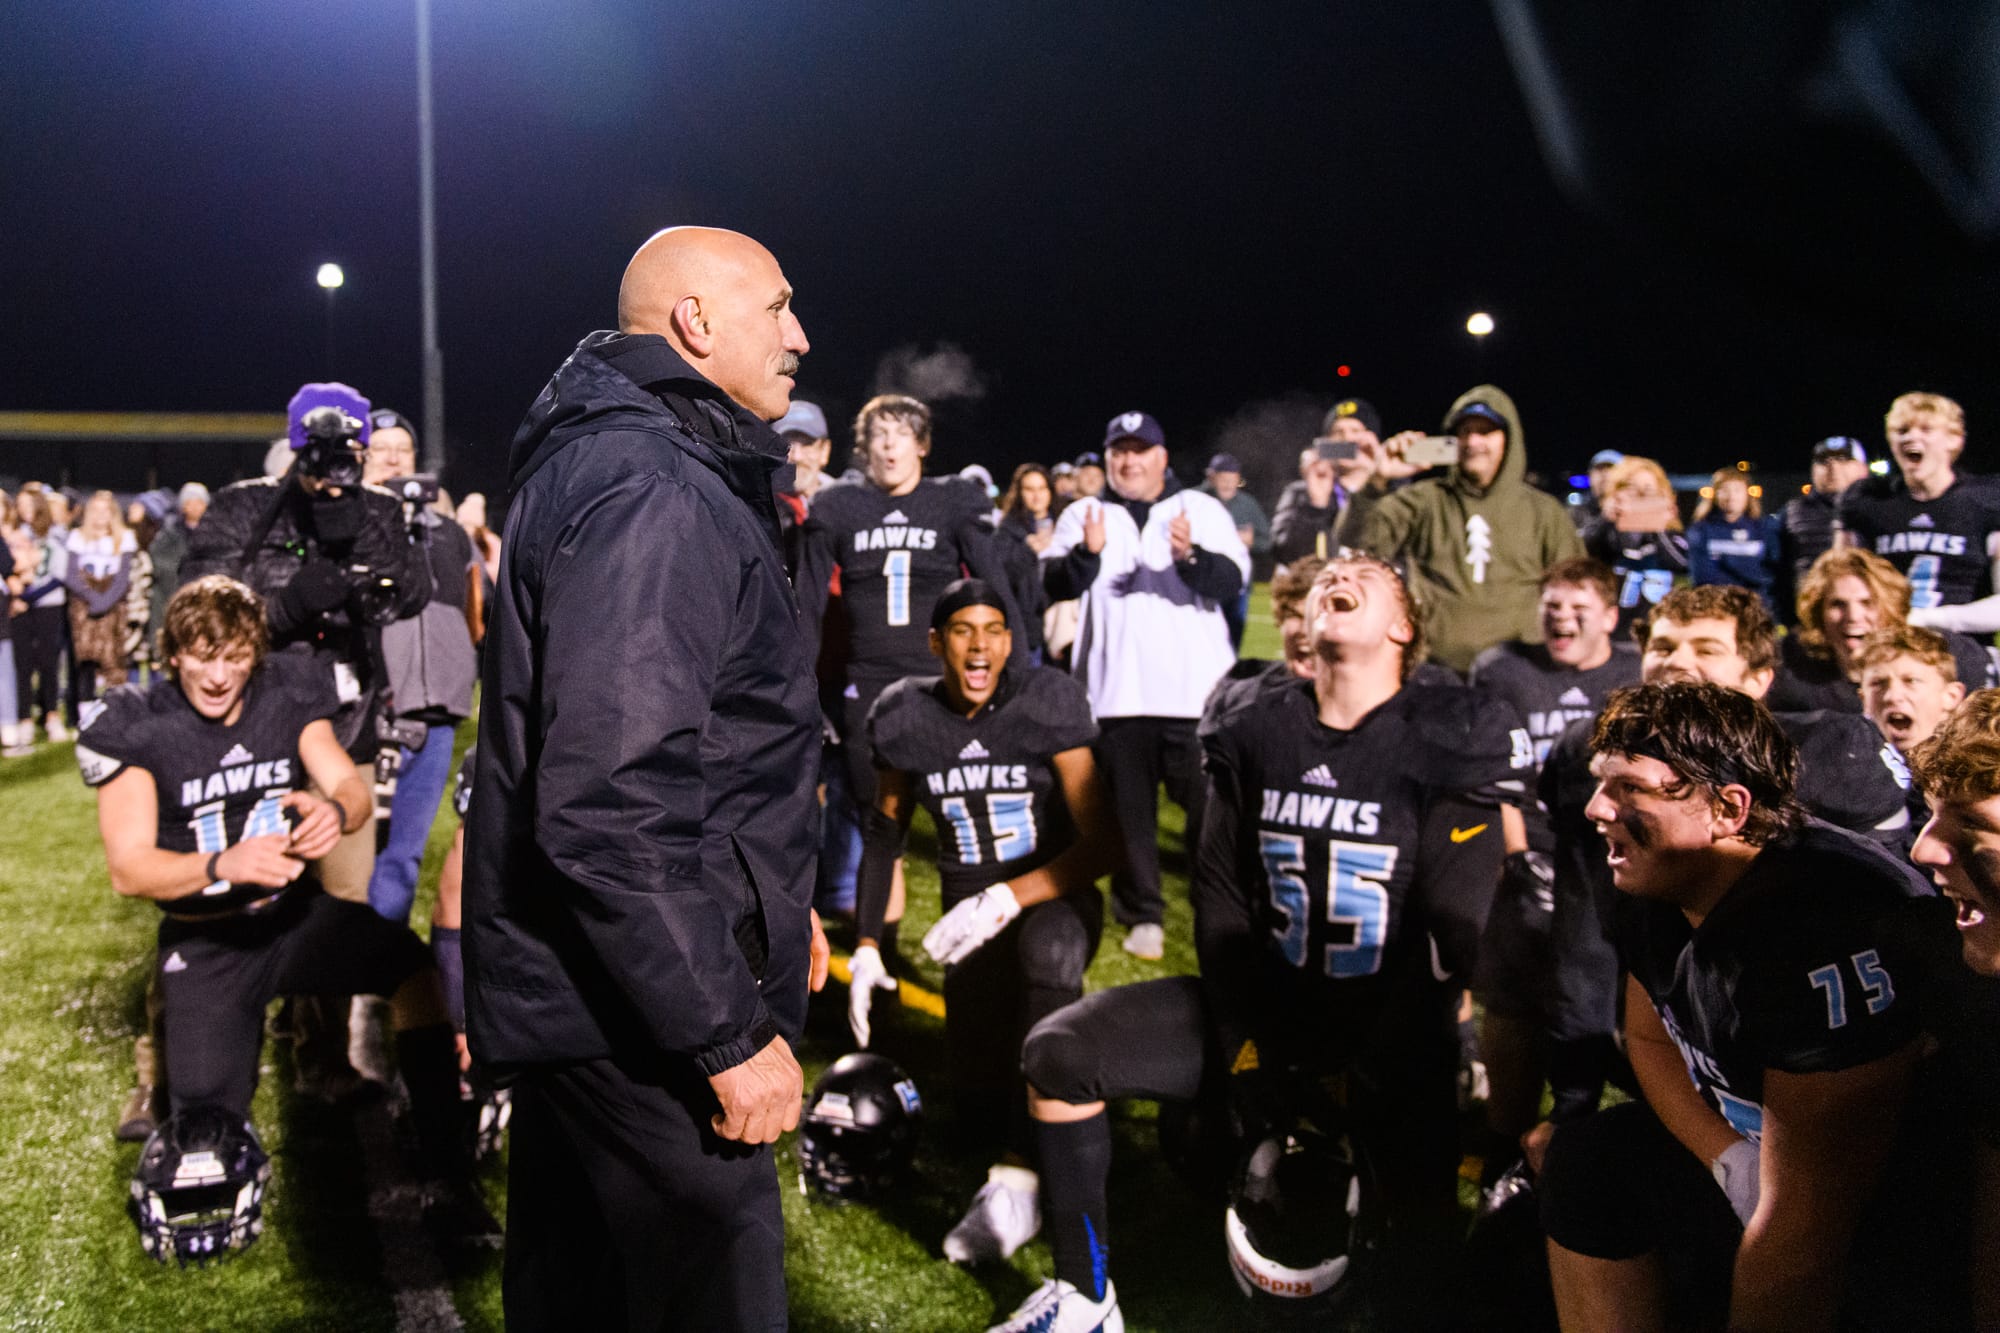 Hockinson Coach Rick Steele tells the team how proud he is of them as they celebrate their 29-28 win over Lakewood in a quarterfinal game on Saturday, Nov. 23, 2019, at Battle Ground District Stadium. (Molly J.